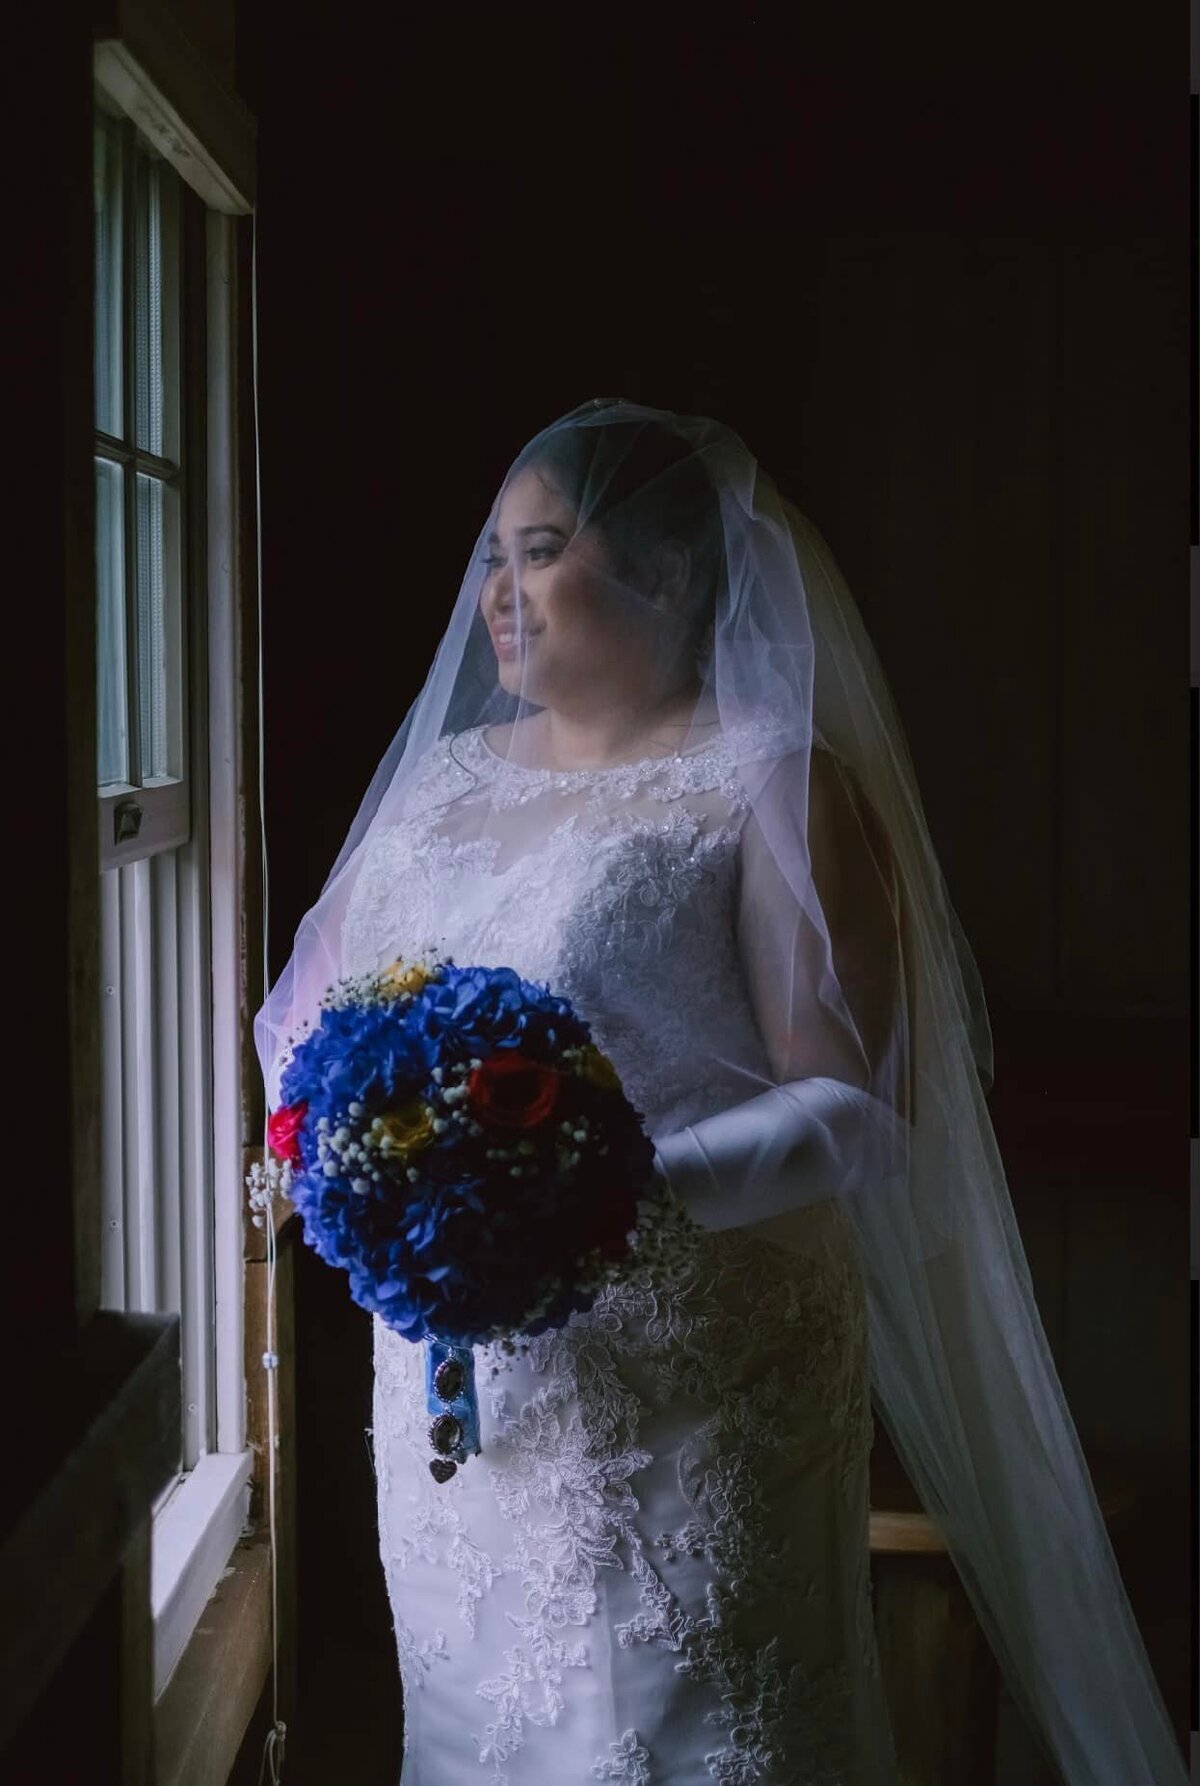 Smiling bride looking through a window in her white wedding dress and blue bouquet.